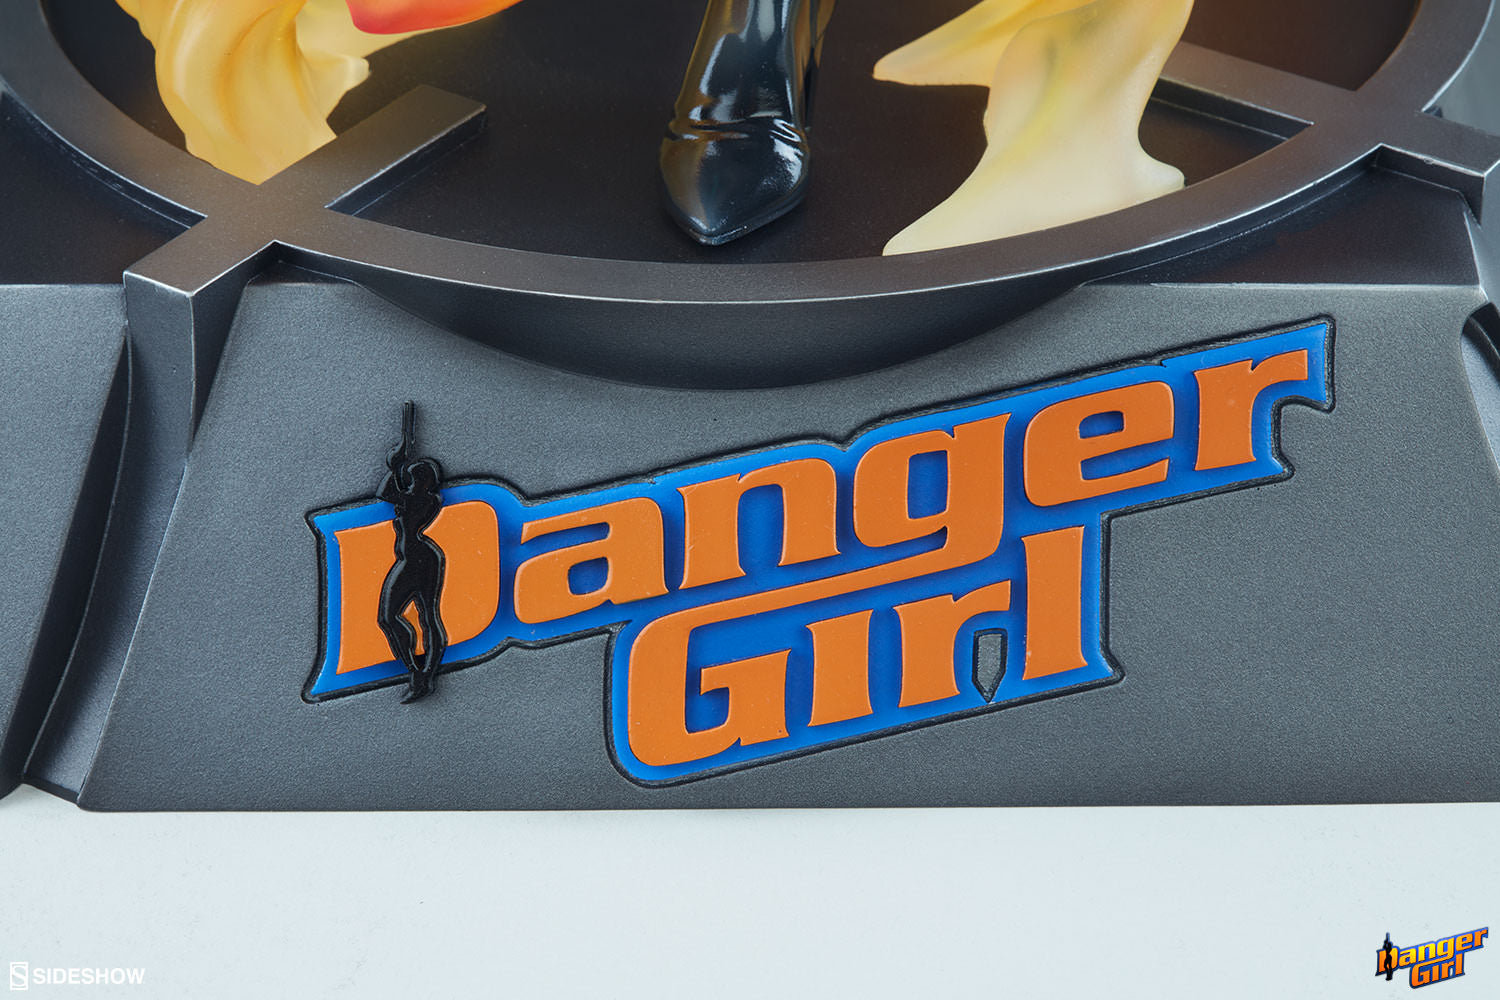 Sideshow Collectibles - Danger Girl - Abbey Chase Premium Format Figure - Marvelous Toys